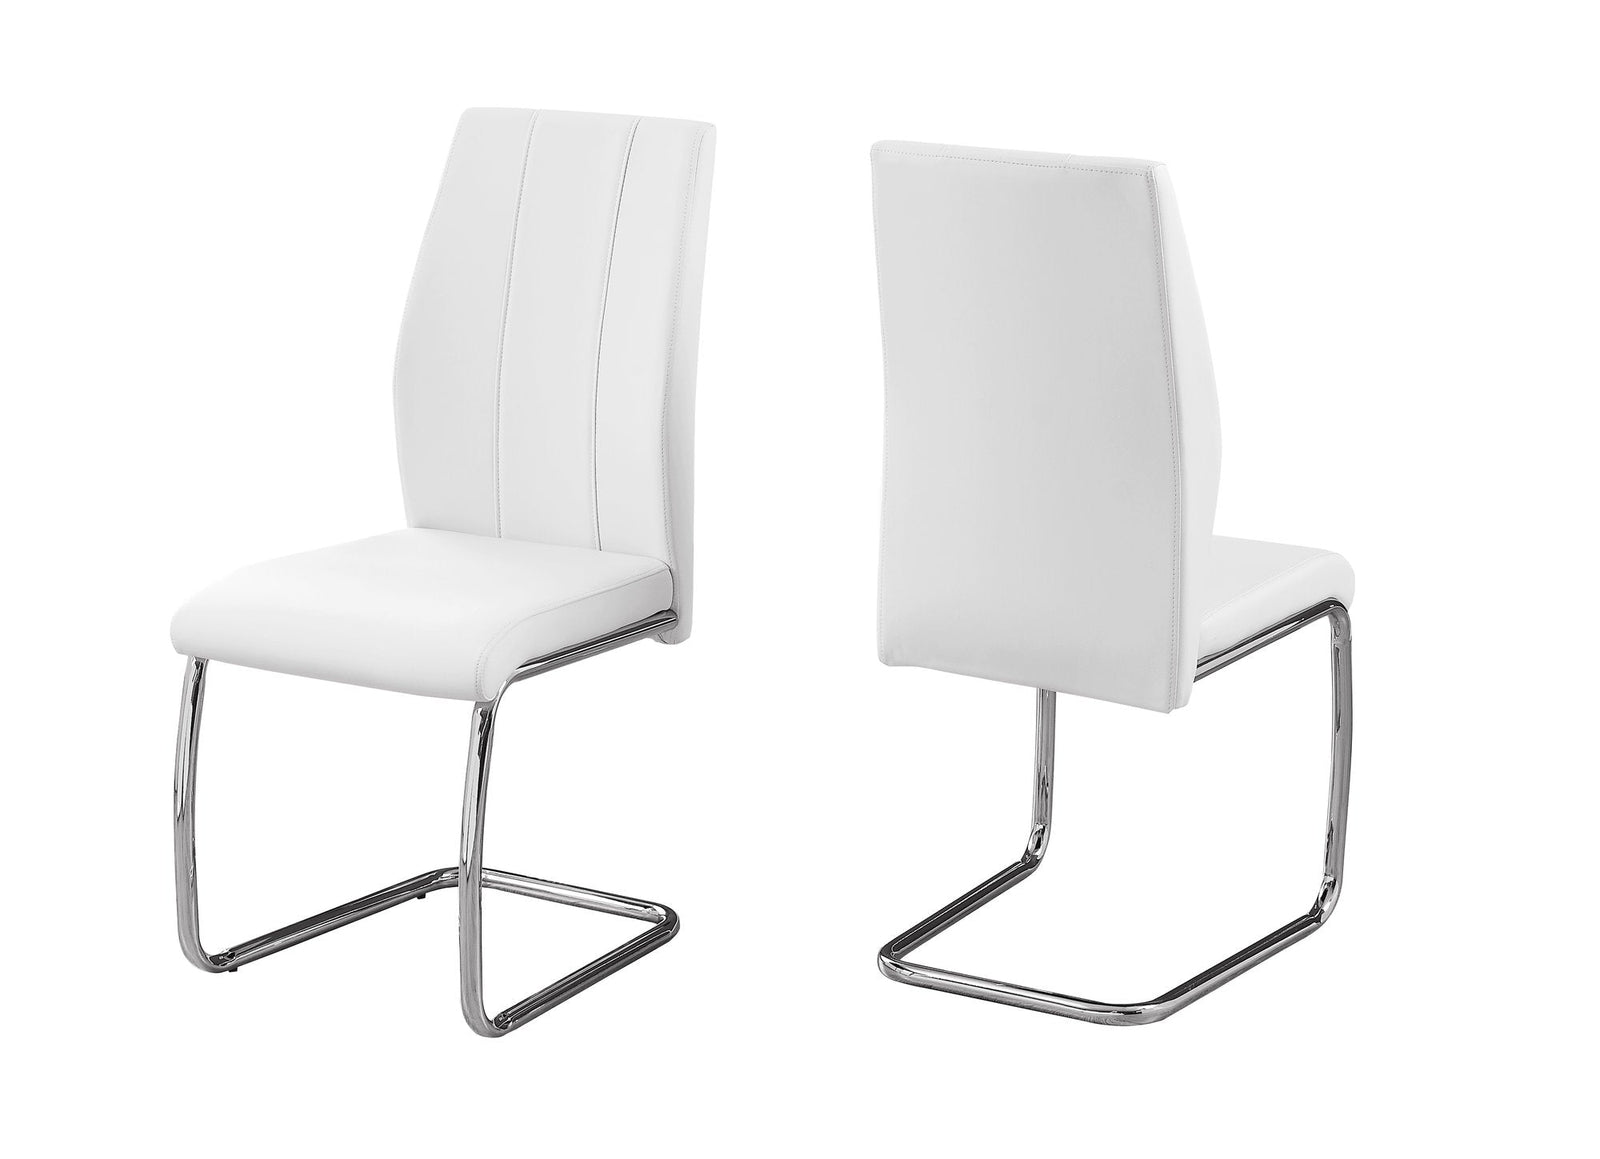 Two 77.5" Leather Look Chrome Metal and Foam Dining Chairs